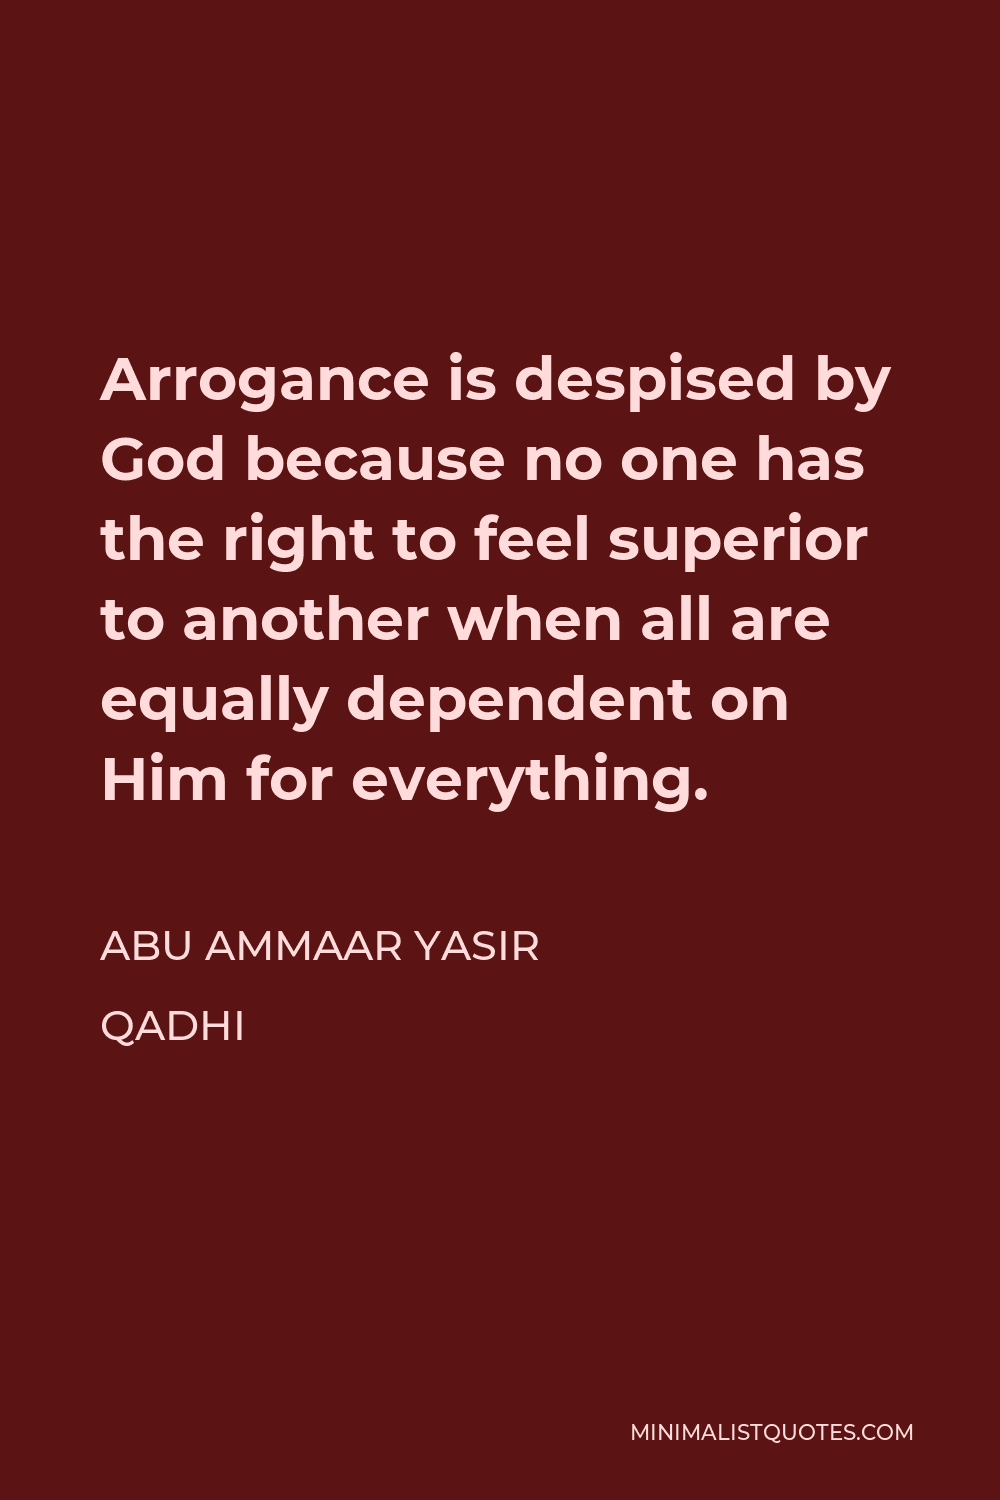 Abu Ammaar Yasir Qadhi Quote - Arrogance is despised by God because no one has the right to feel superior to another when all are equally dependent on Him for everything.